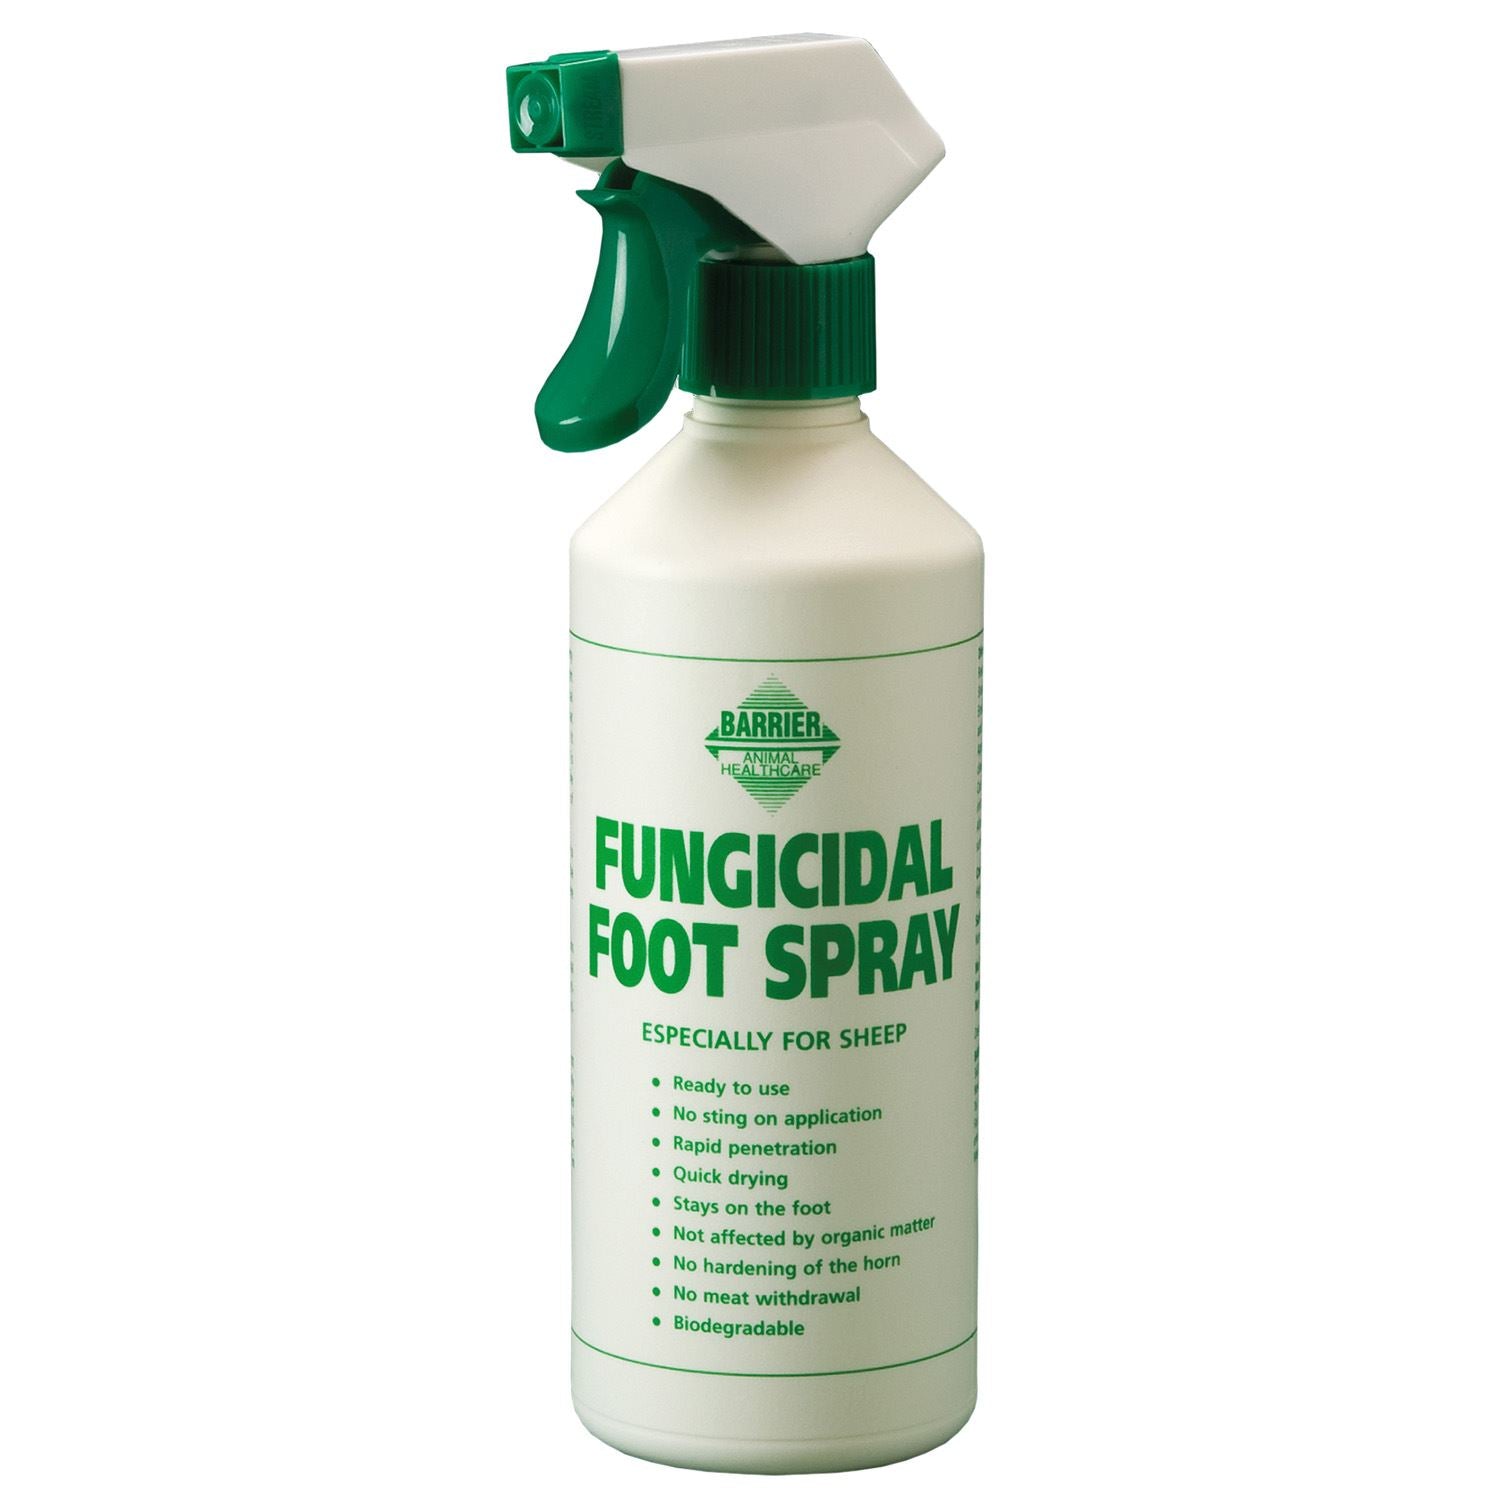 Barrier Fungicidal Foot Spray For Sheep - Just Horse Riders